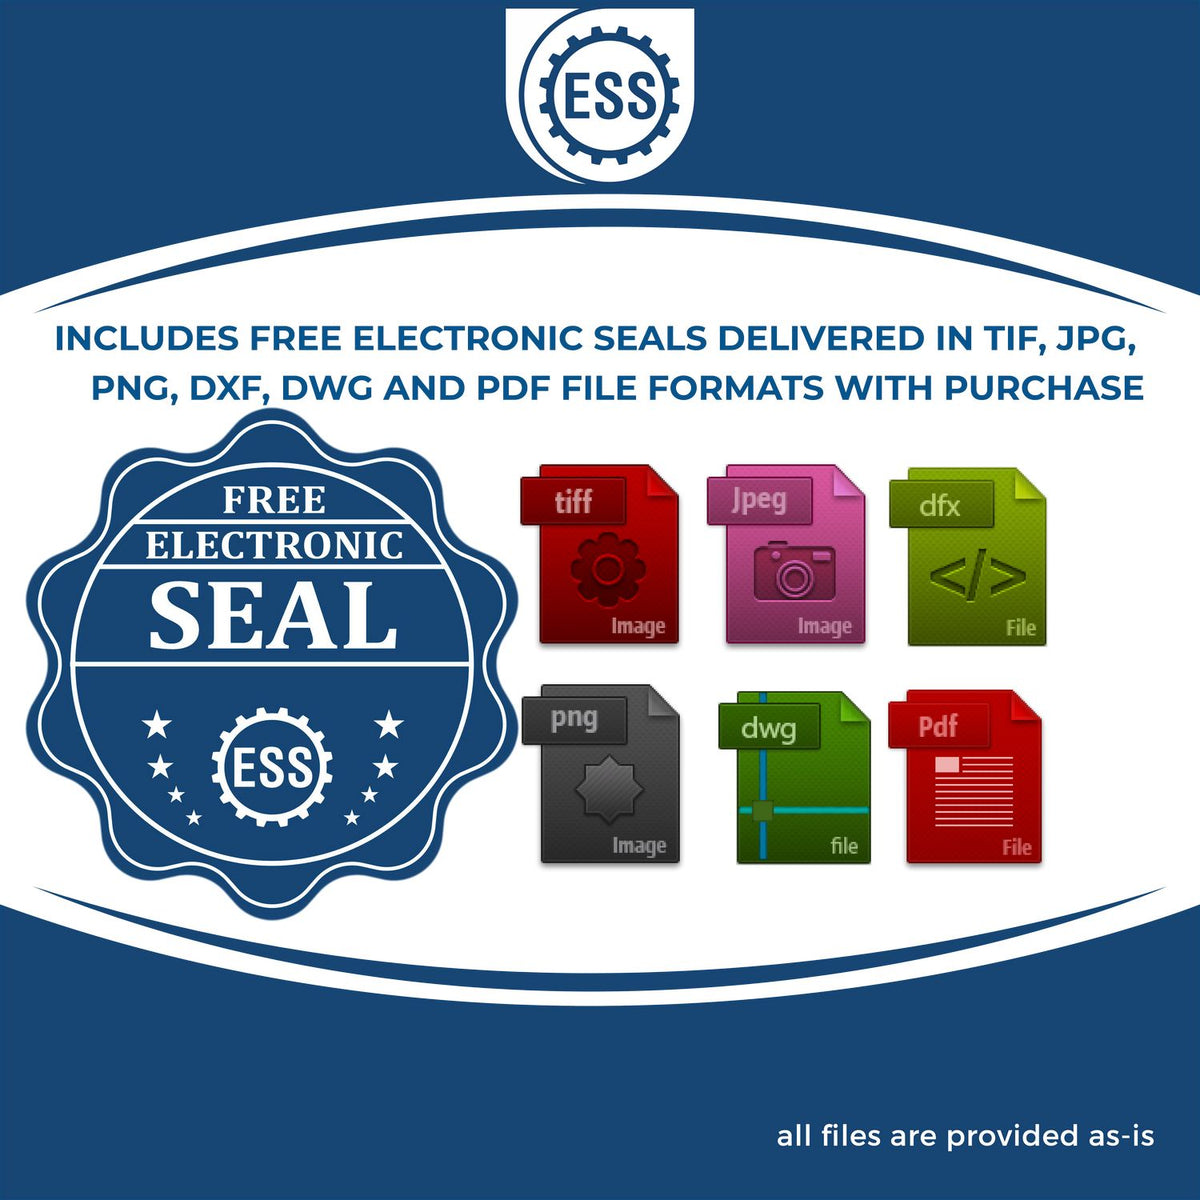 An infographic for the free electronic seal for the PSI Montana Notary Stamp illustrating the different file type icons such as DXF, DWG, TIF, JPG and PNG.